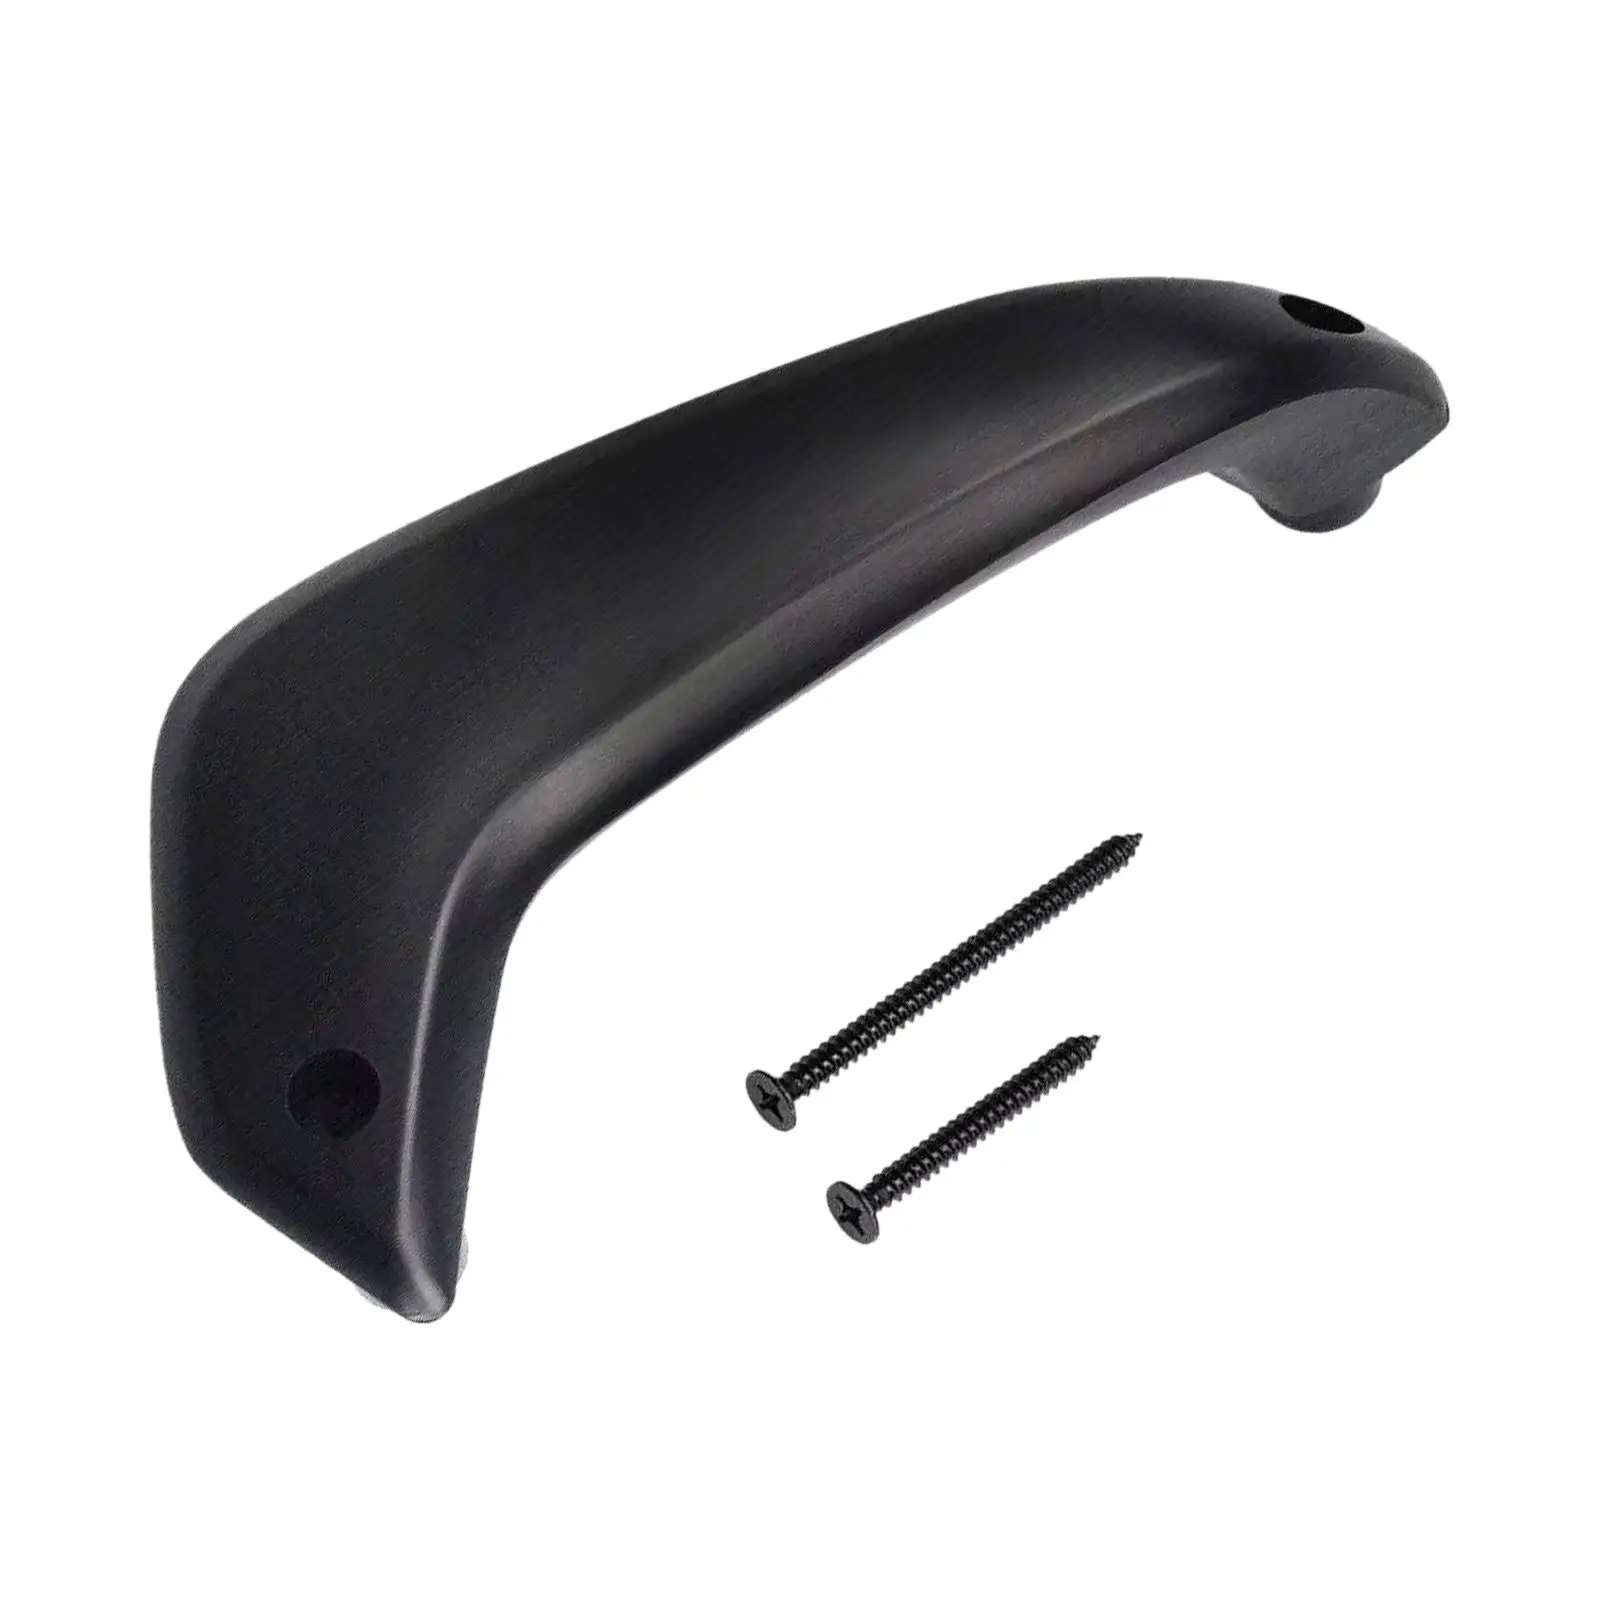 Inside Door Handle Replacement Parts with 2 Screws ,Easy to Install, Vehicle Parts for Fiesta Black